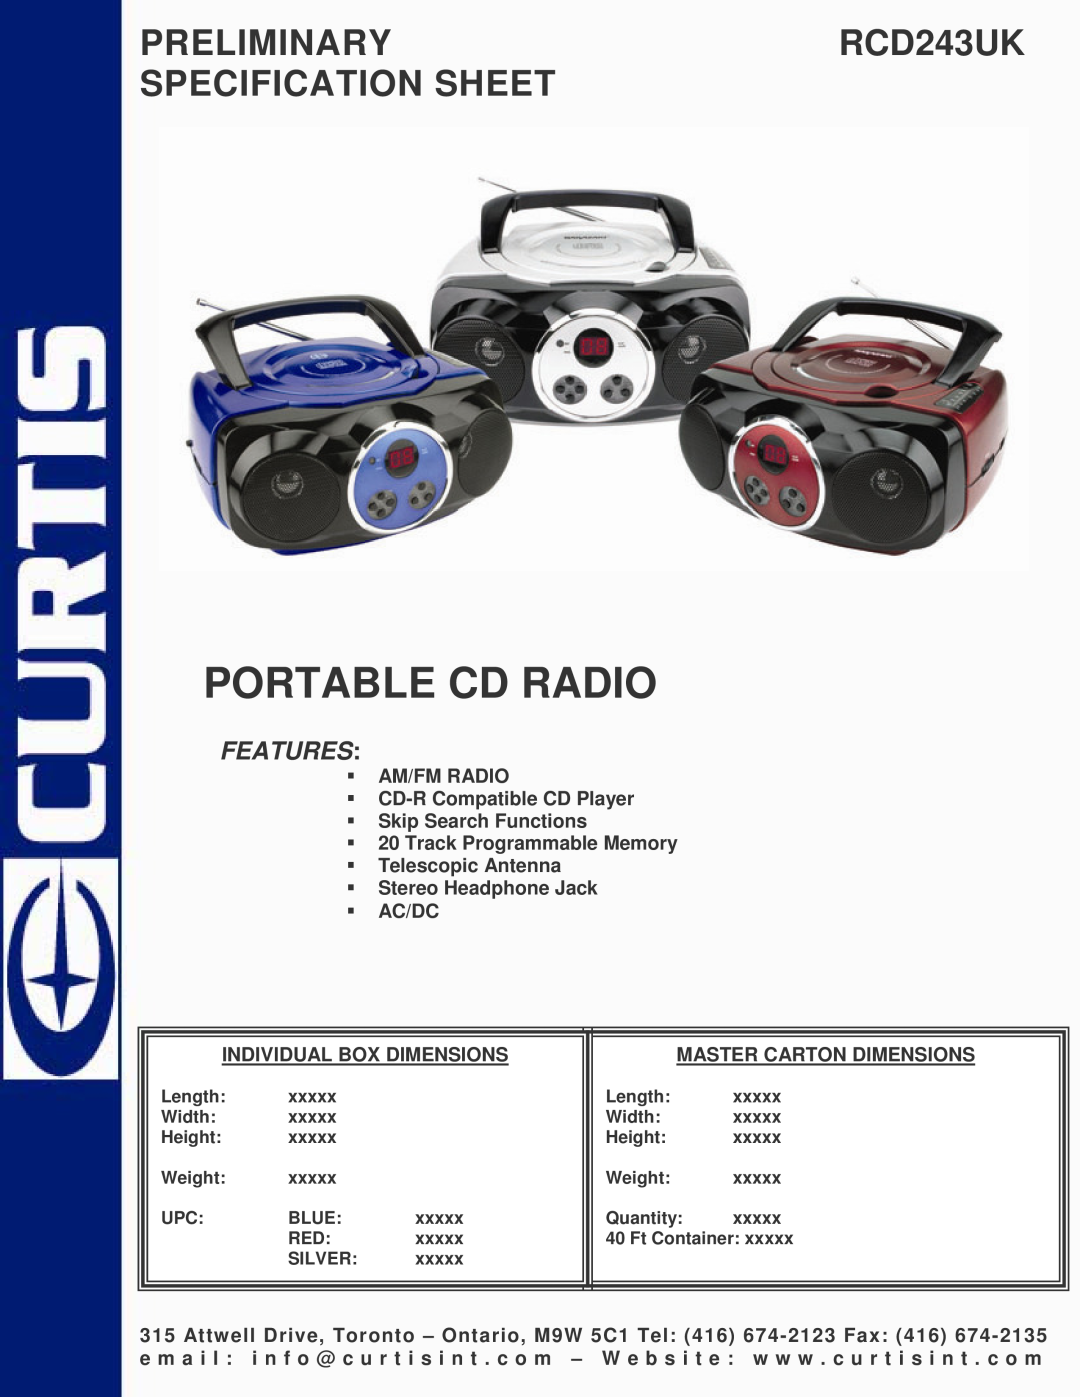 Curtis specifications Portable Cd Radio, PRELIMINARYRCD243UK SPECIFICATION SHEET, Features 